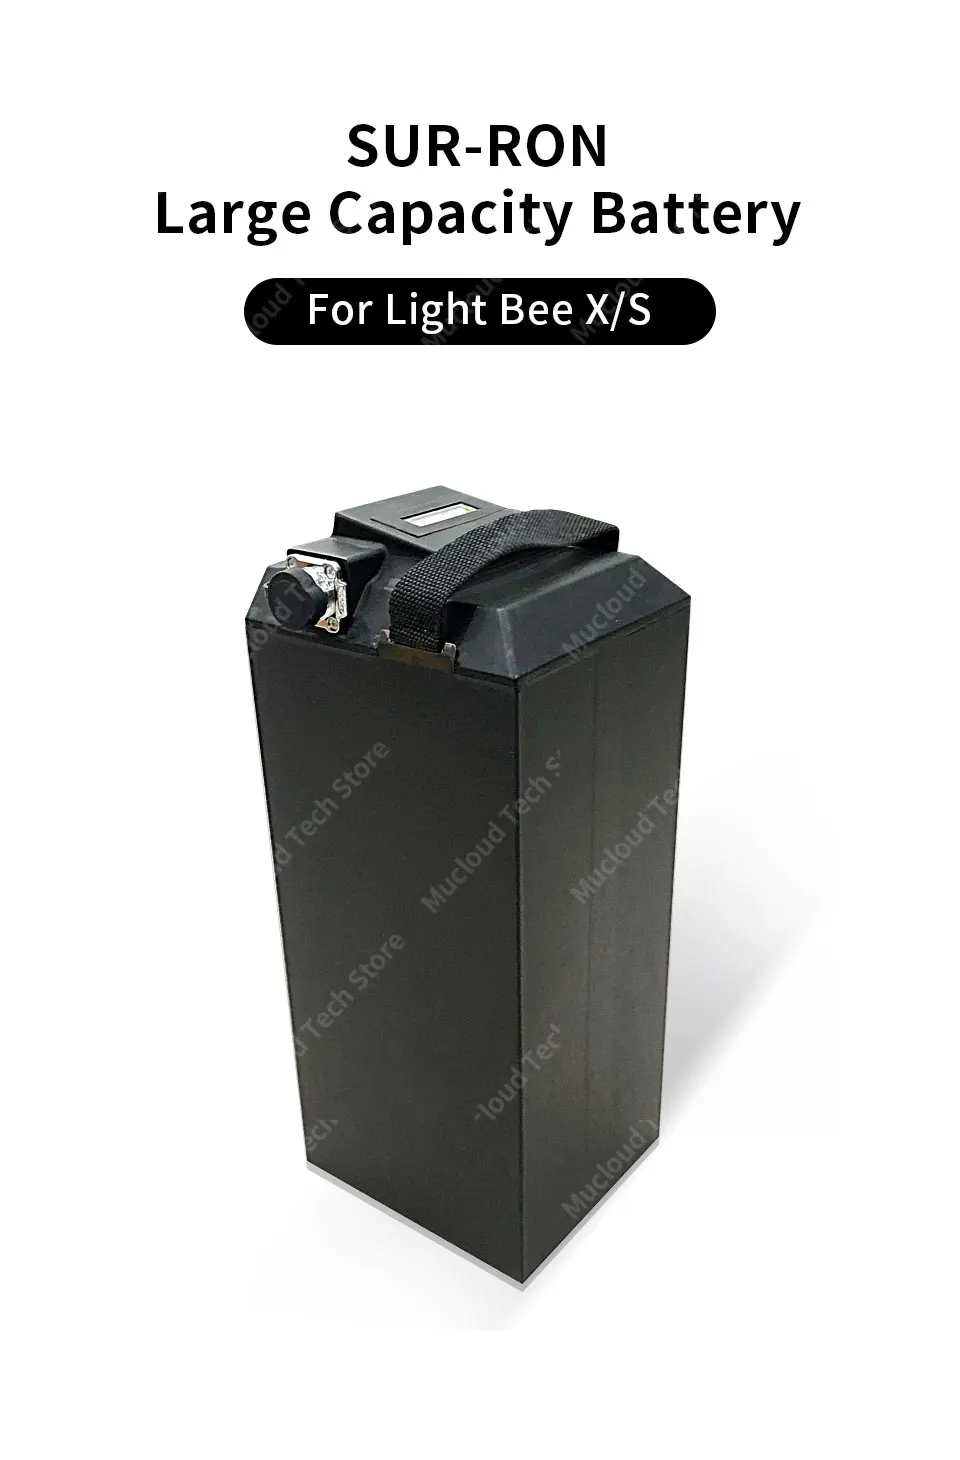 Source SURRON Light Bee X Battery Large Capacity 60V 72V Direct Replacement Ant BMS Motorcycles Off-road Dirtbike SUR-RON on m.alibaba.com